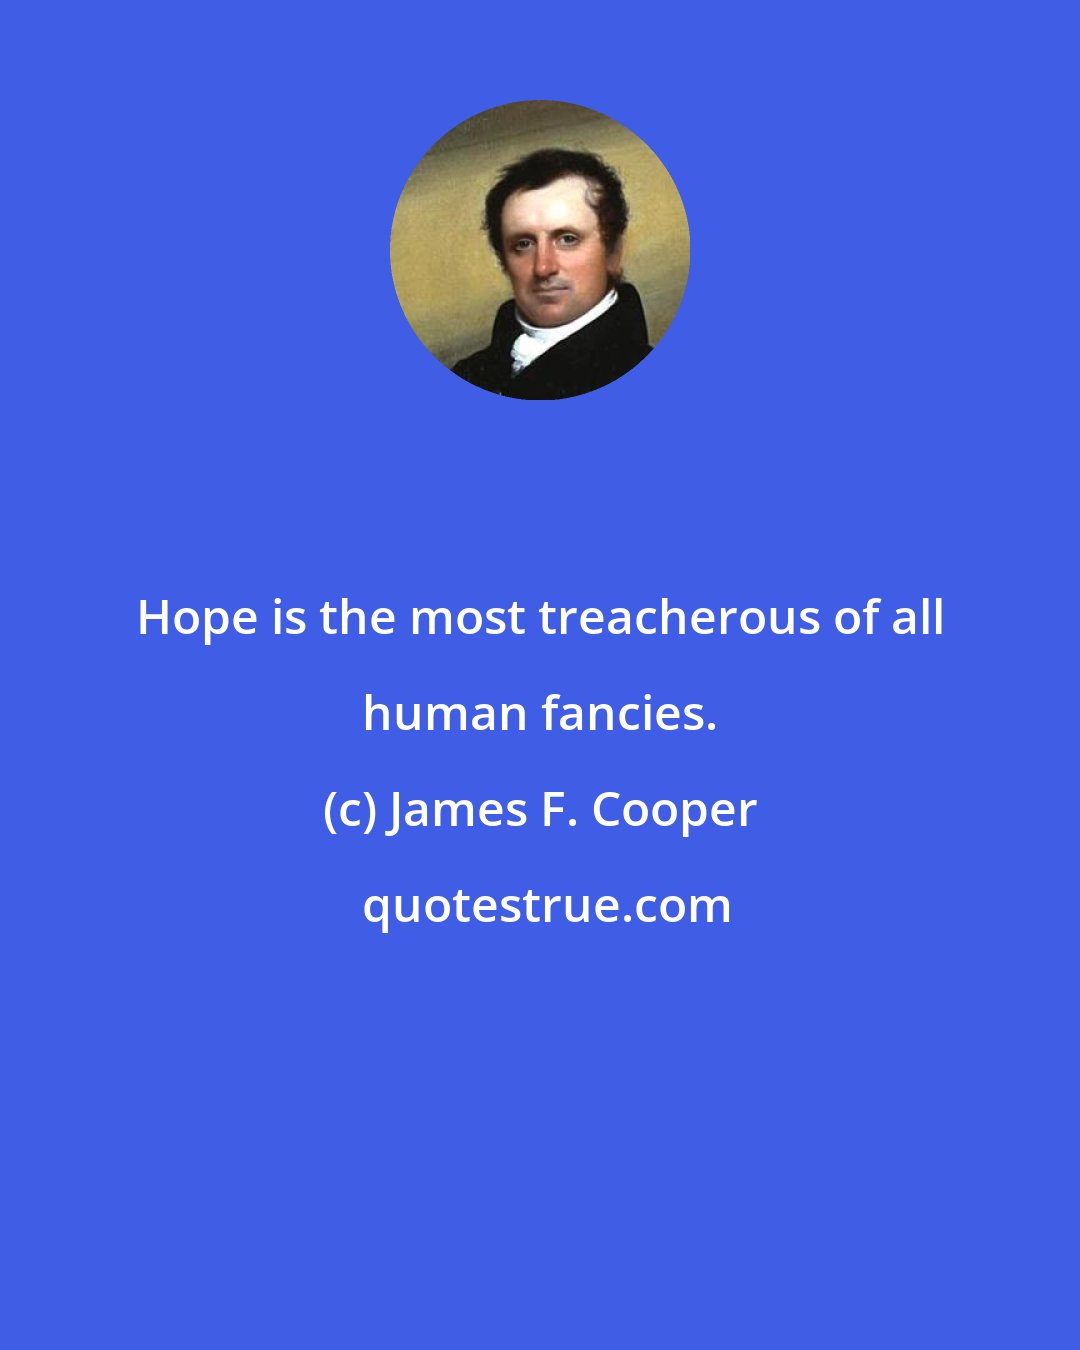 James F. Cooper: Hope is the most treacherous of all human fancies.